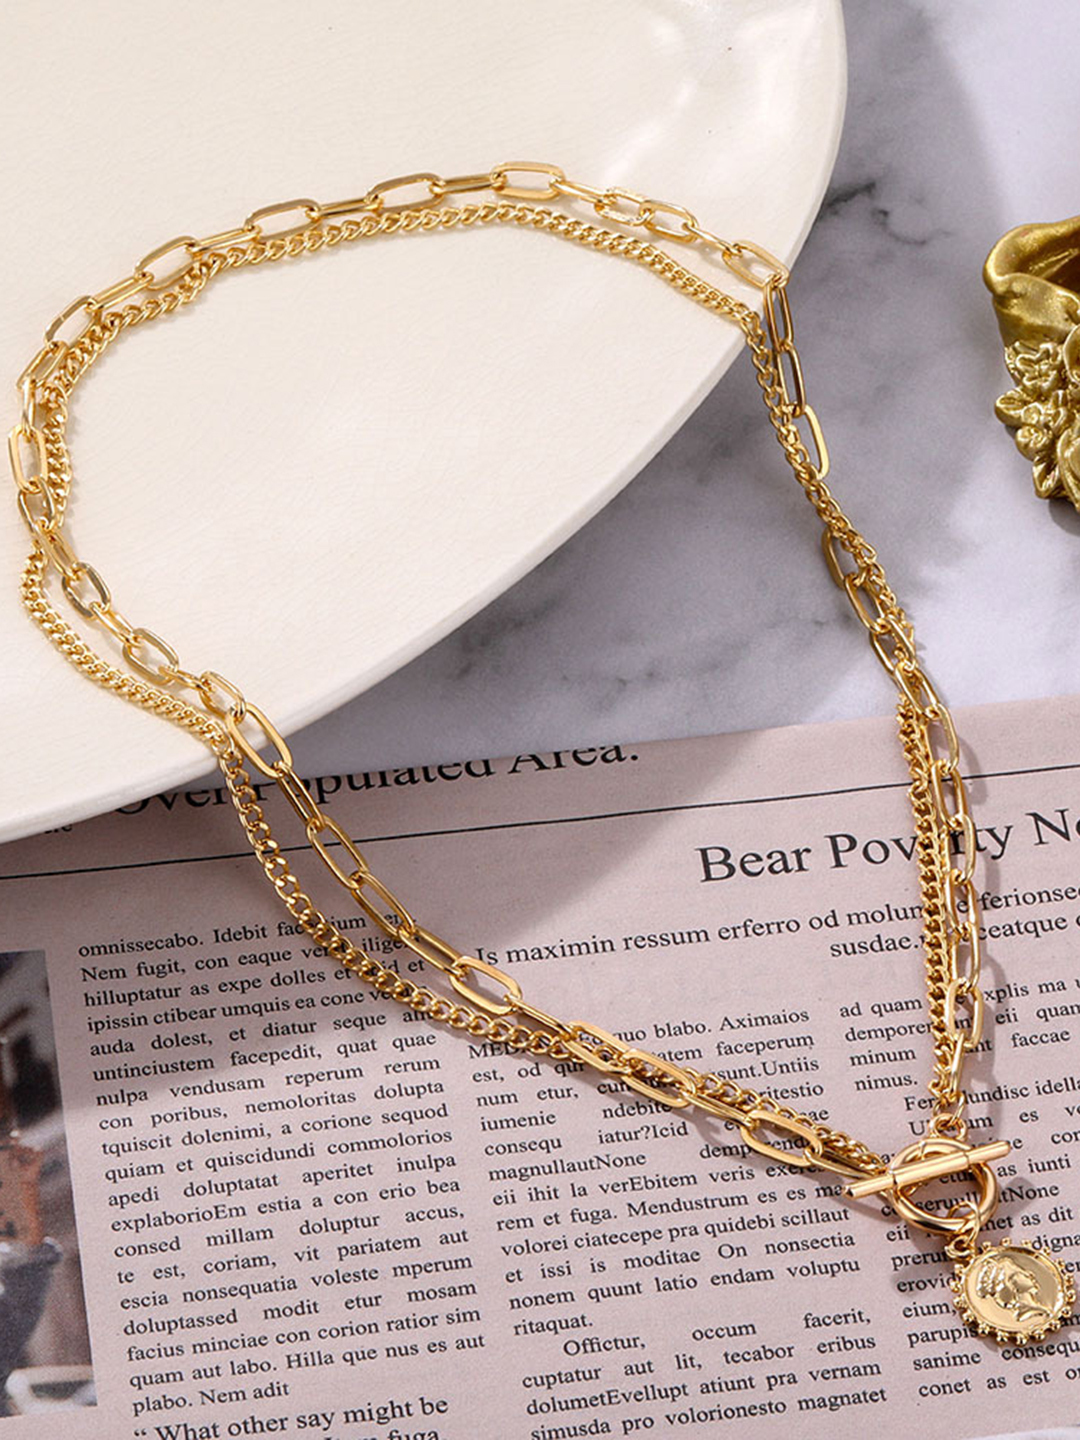 Pretty Gold Plated Coin Pendant Necklace for Women and Girls